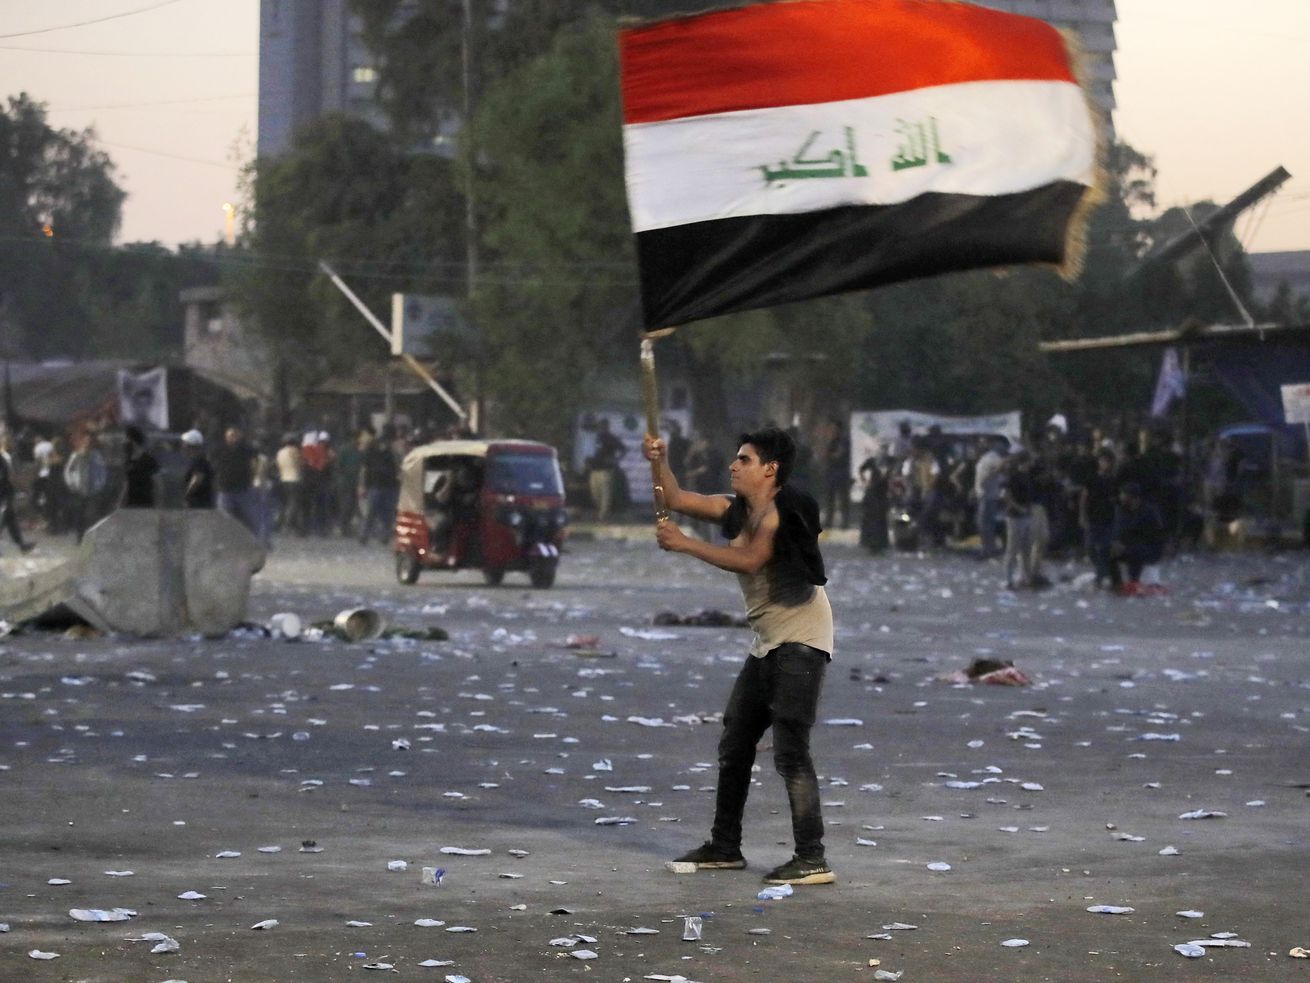 Why Iraq could be approaching another civil war, explained by an expert